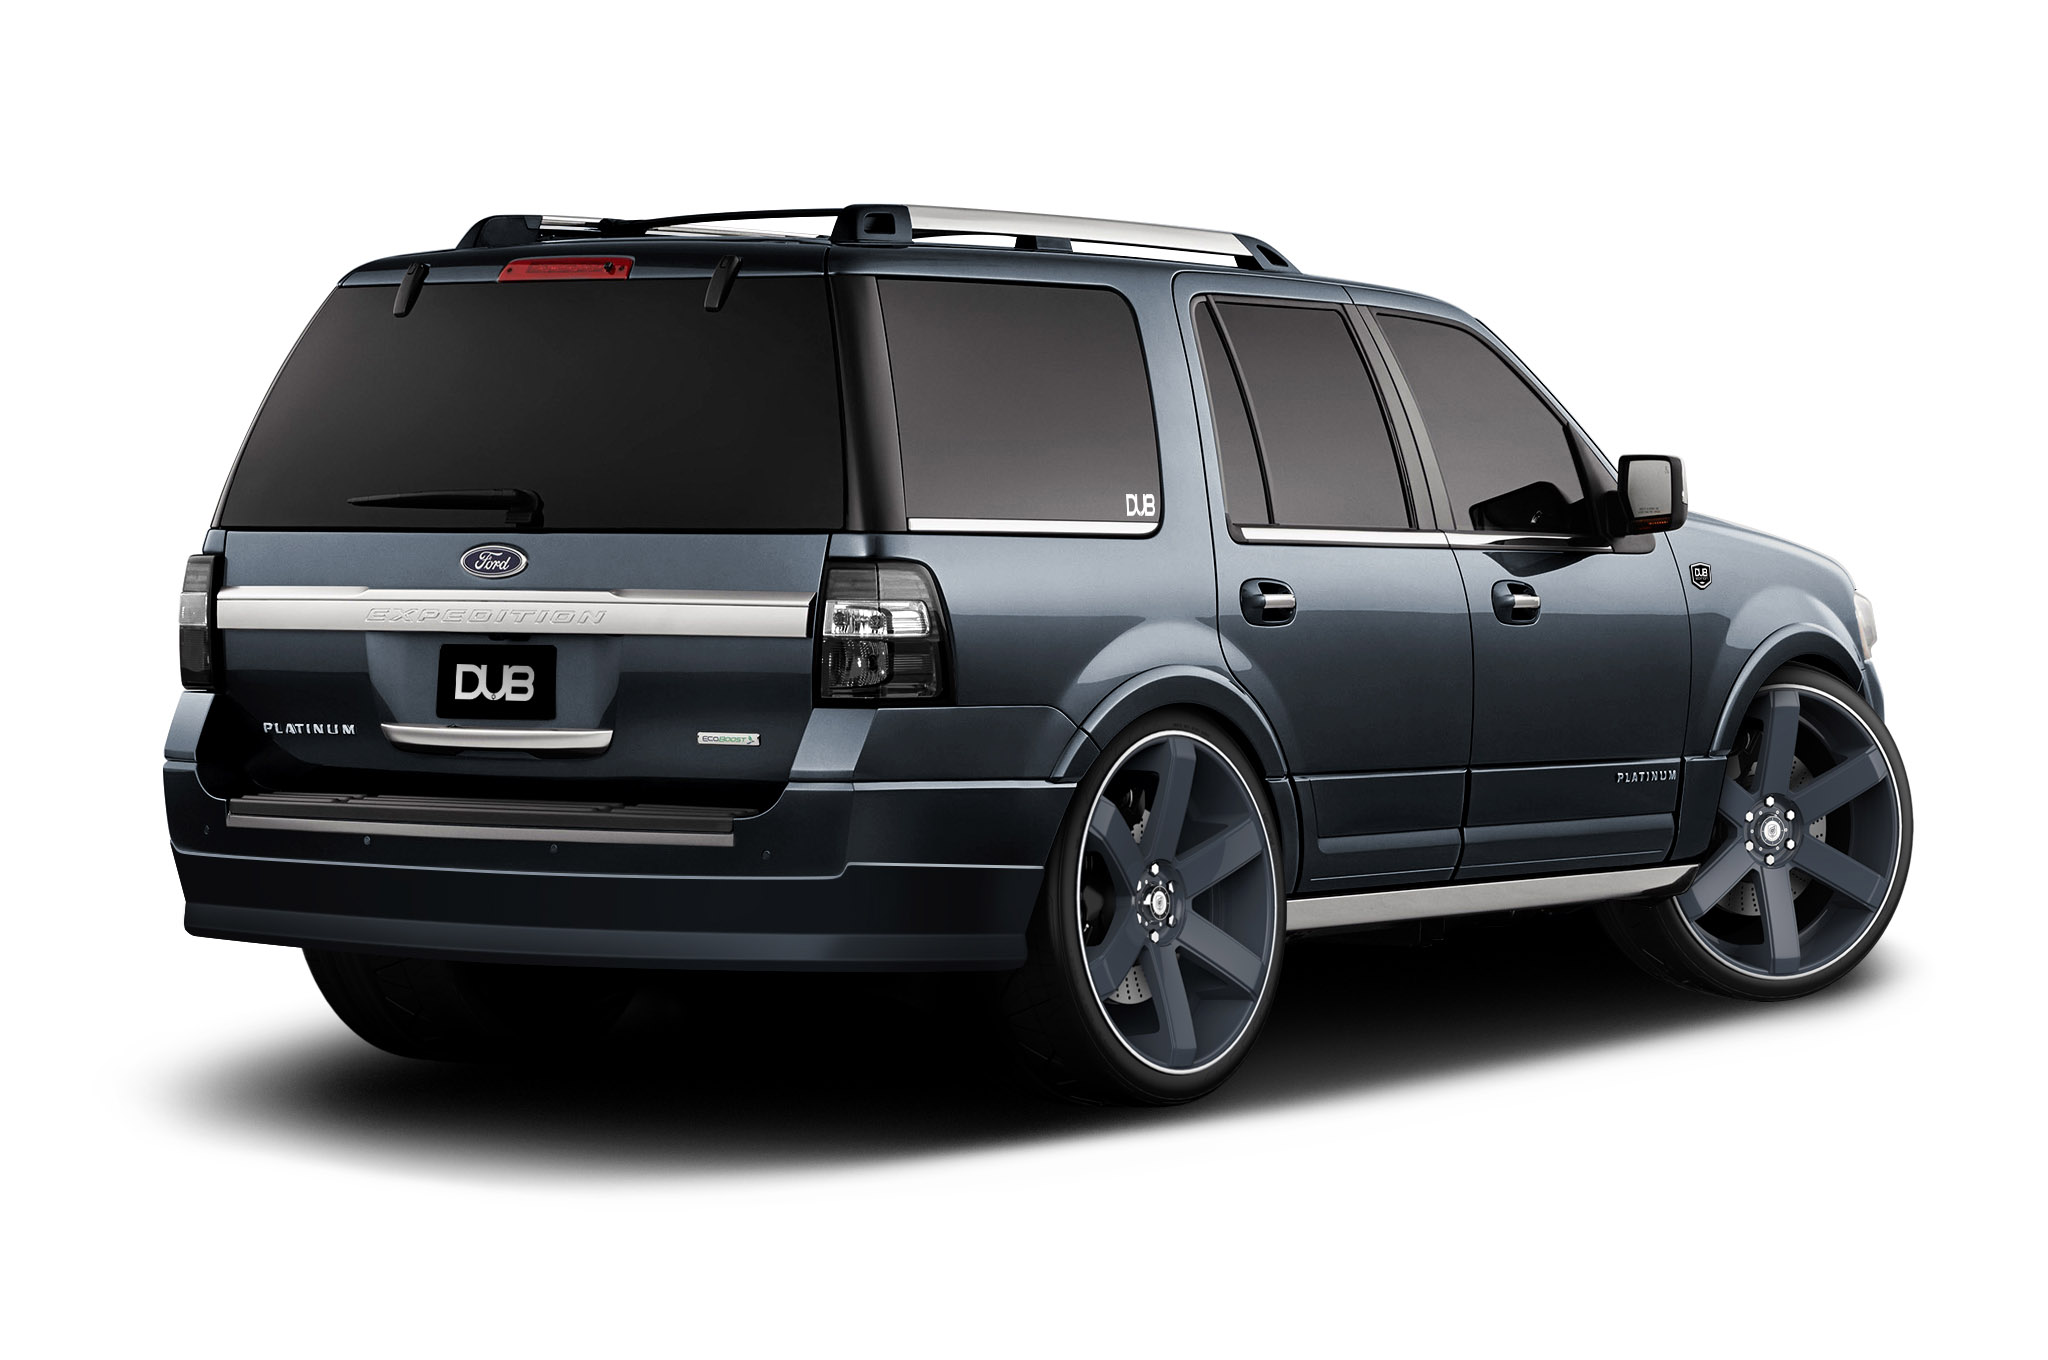 2015 Ford Expedition DUB Edition